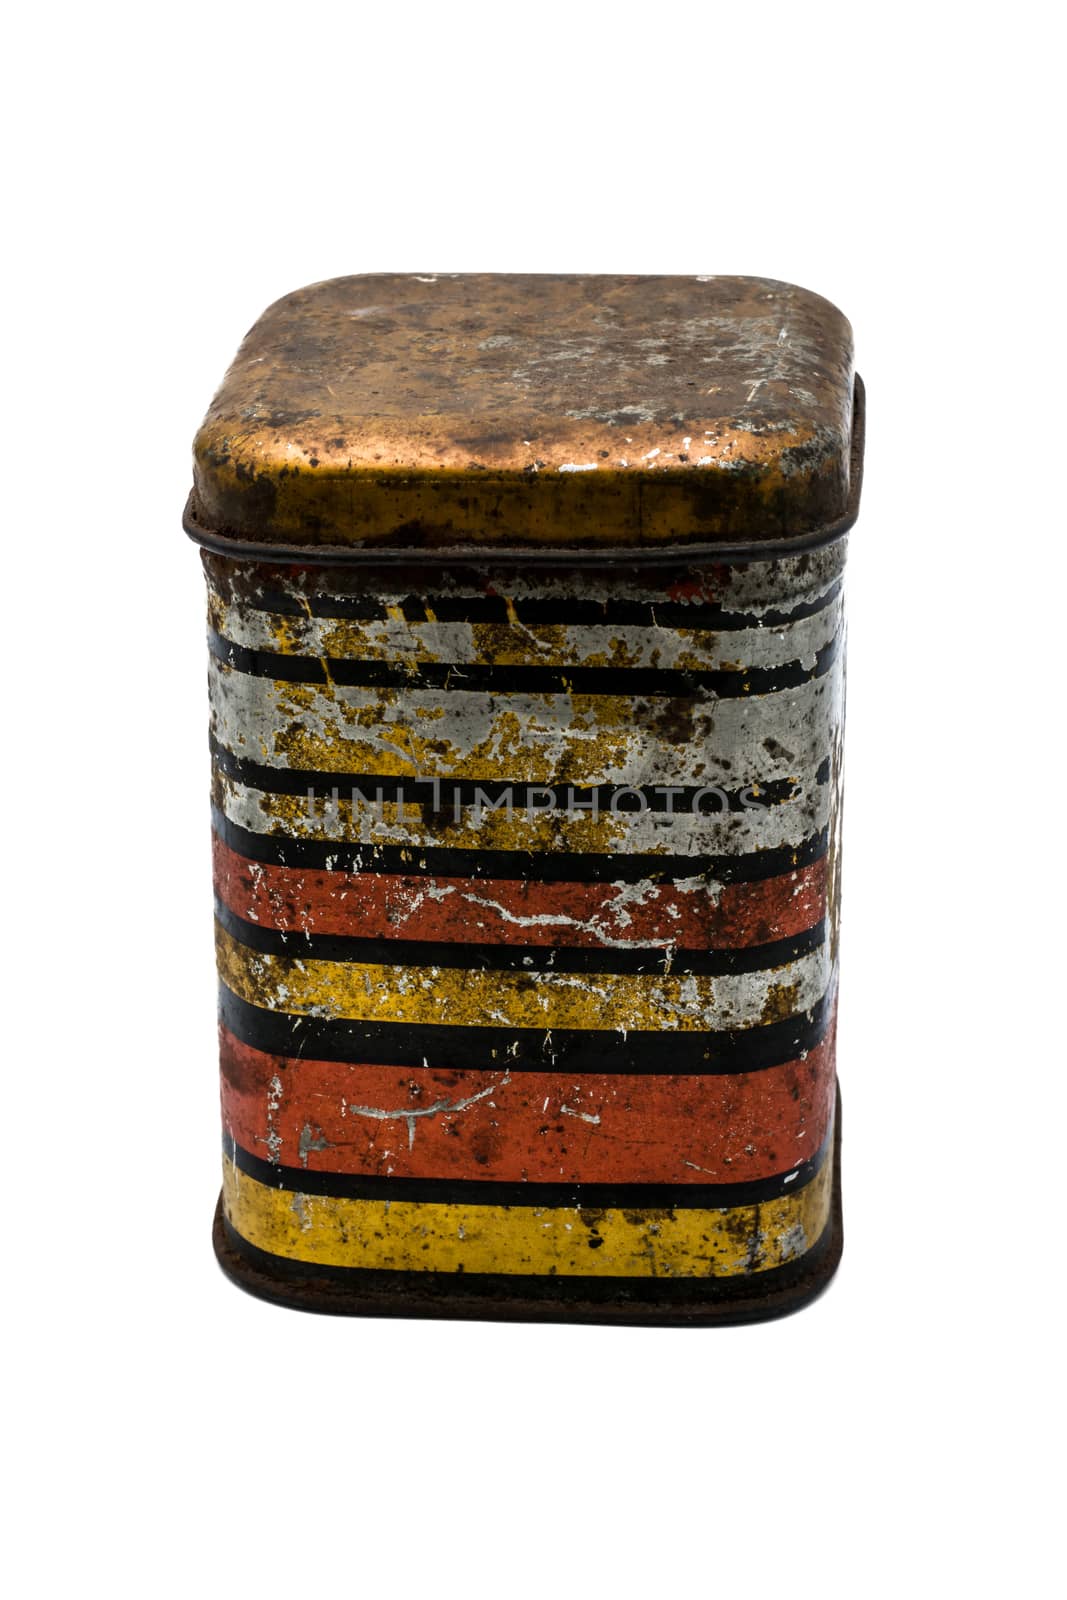 old closed jar tin in vintage style on isolated background